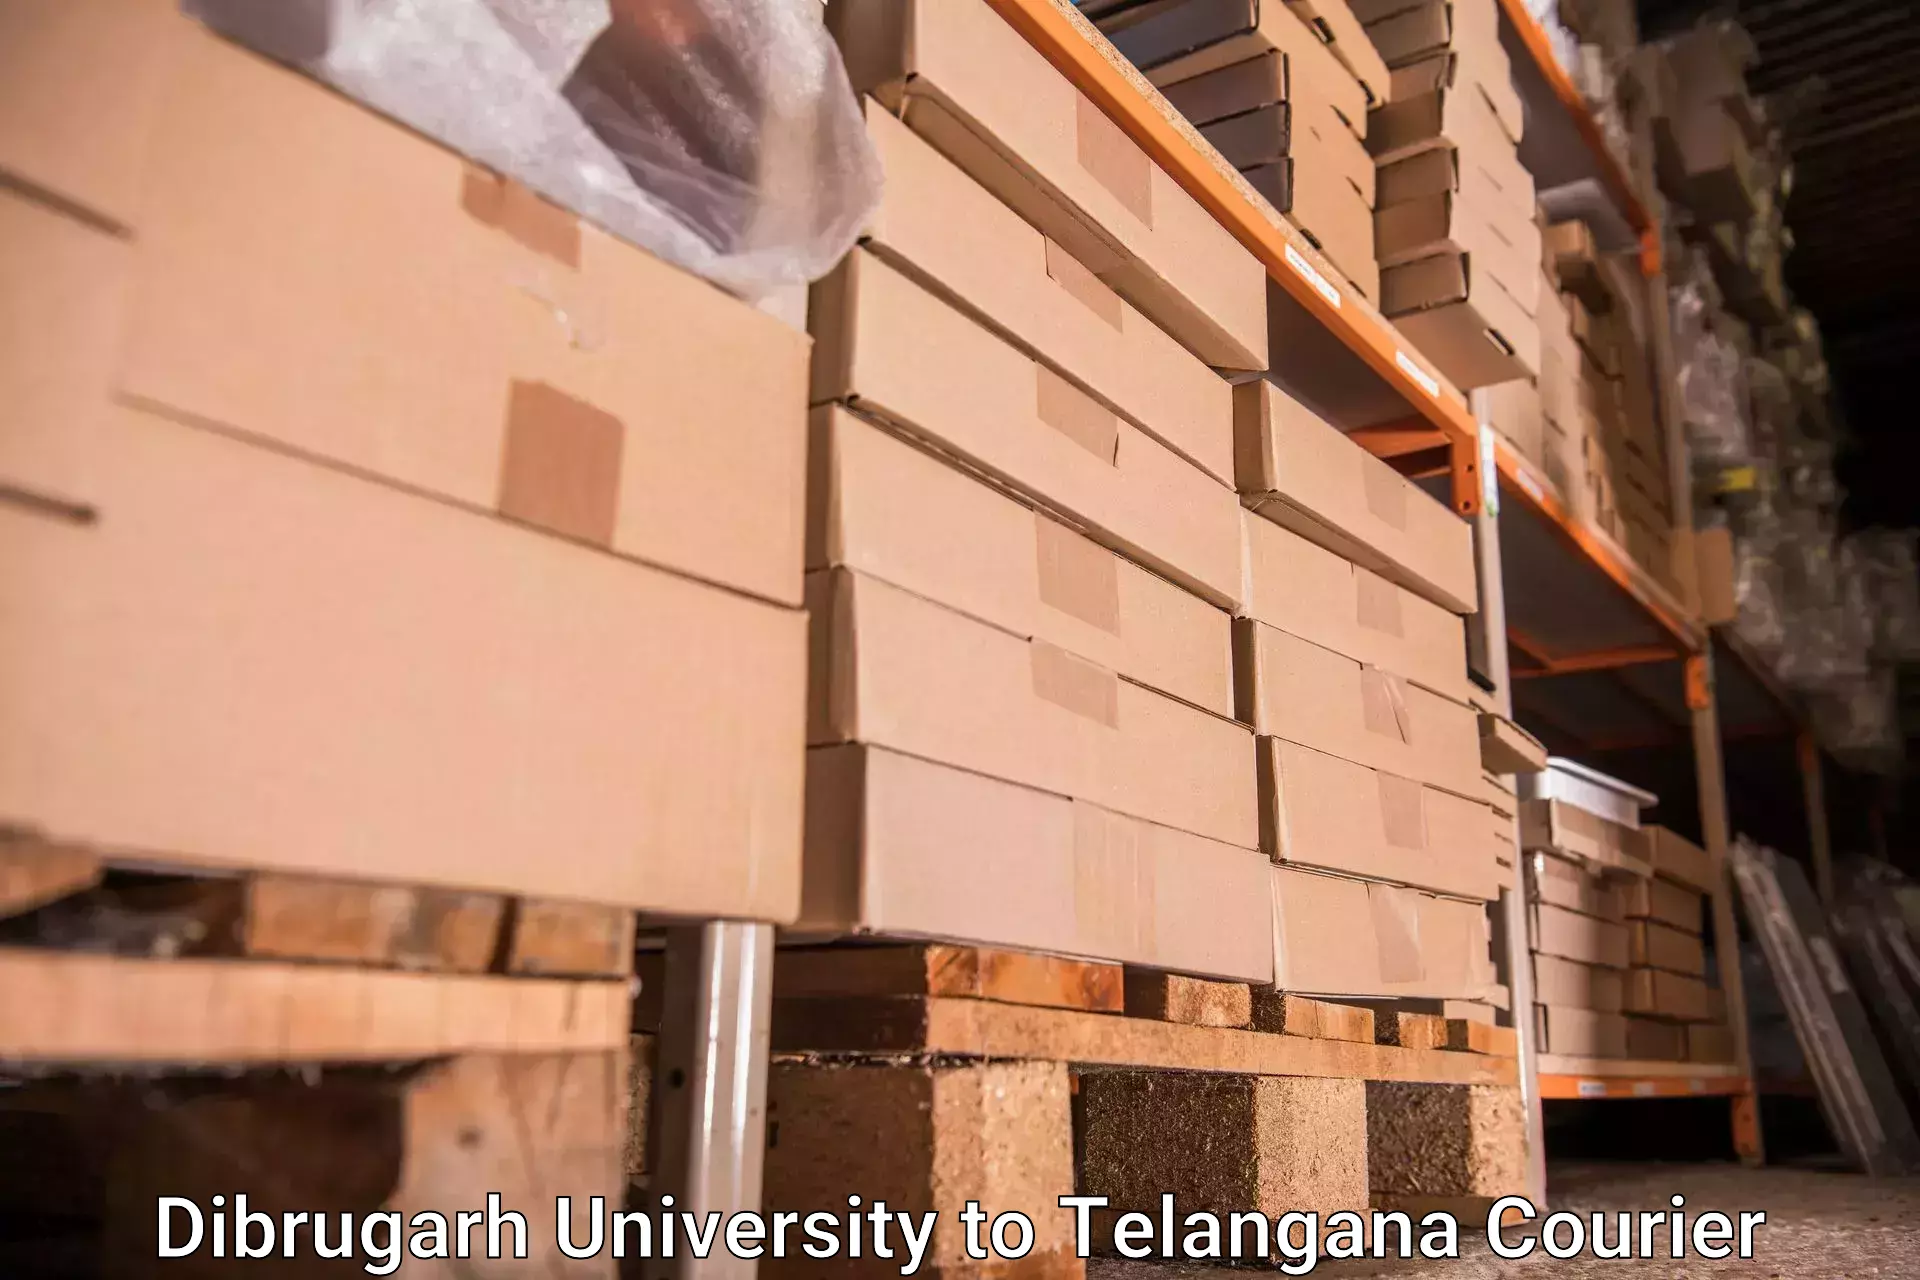 Baggage shipping logistics in Dibrugarh University to Secunderabad